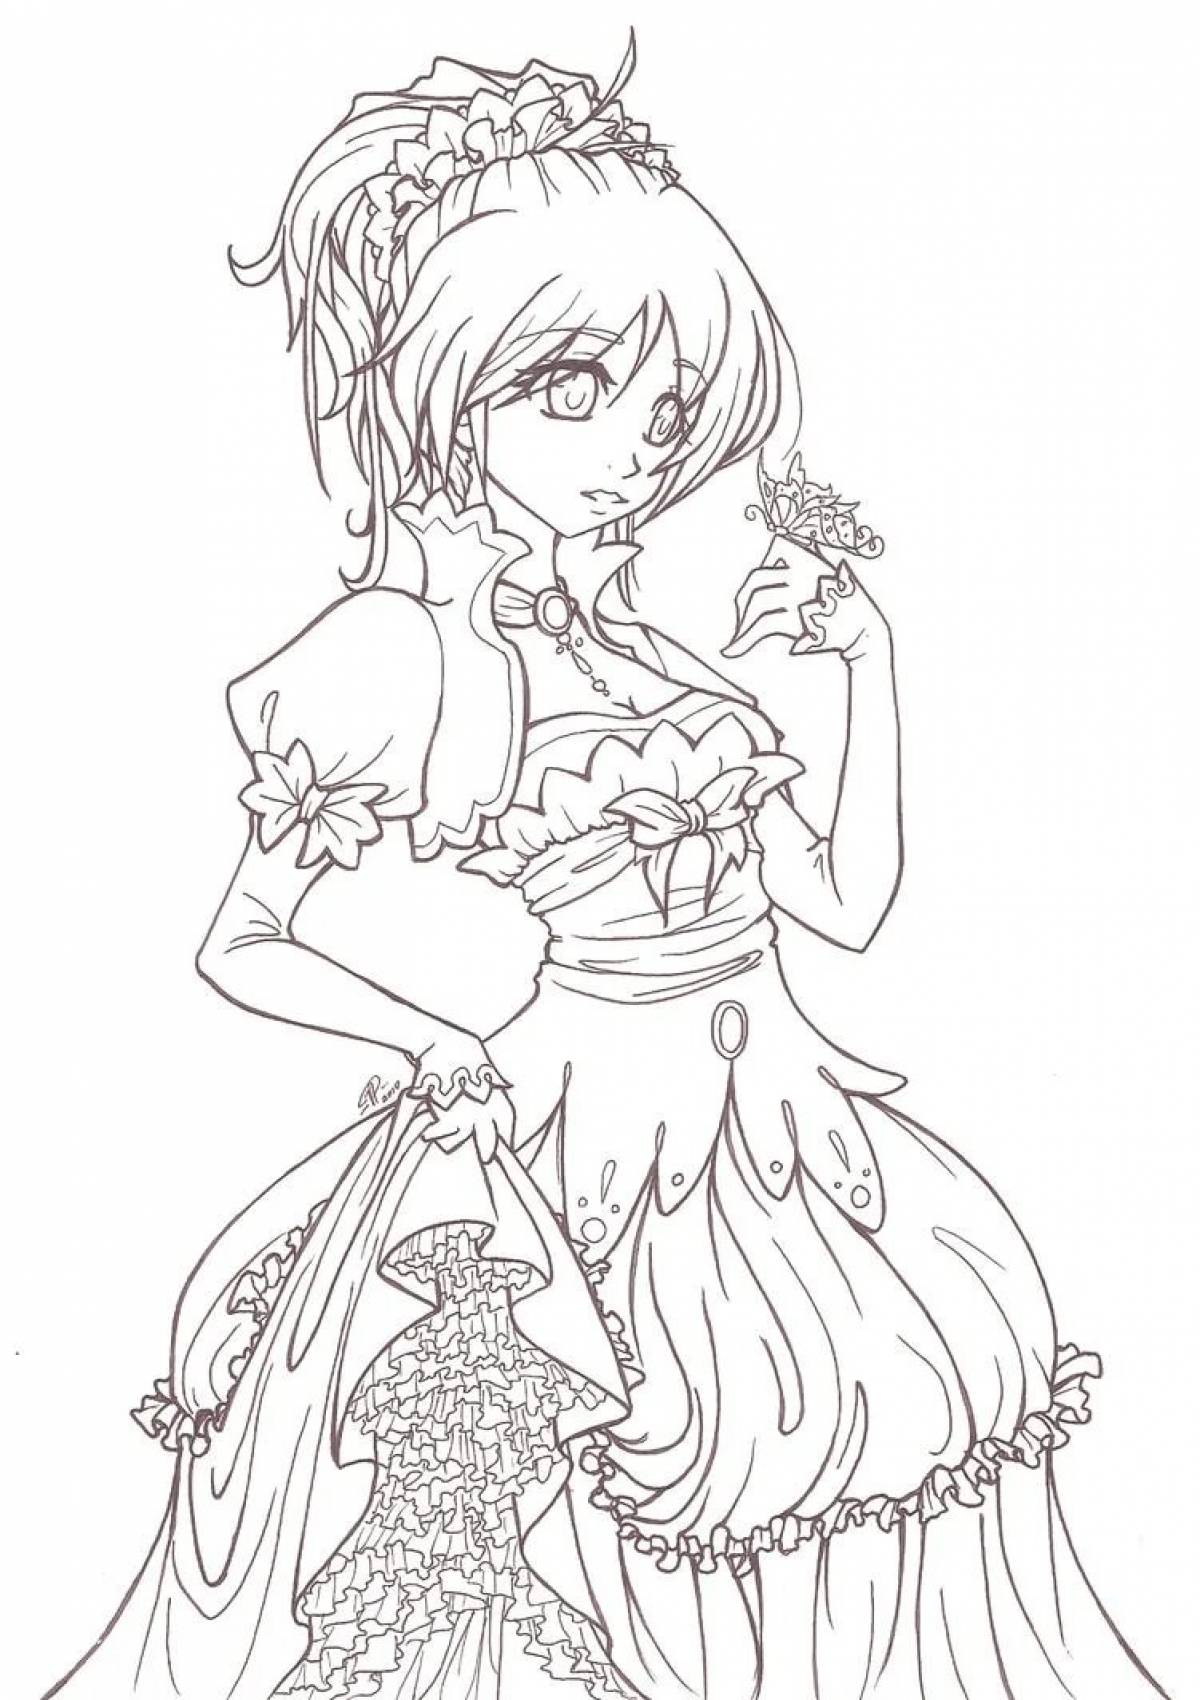 Exquisite anime princess coloring book